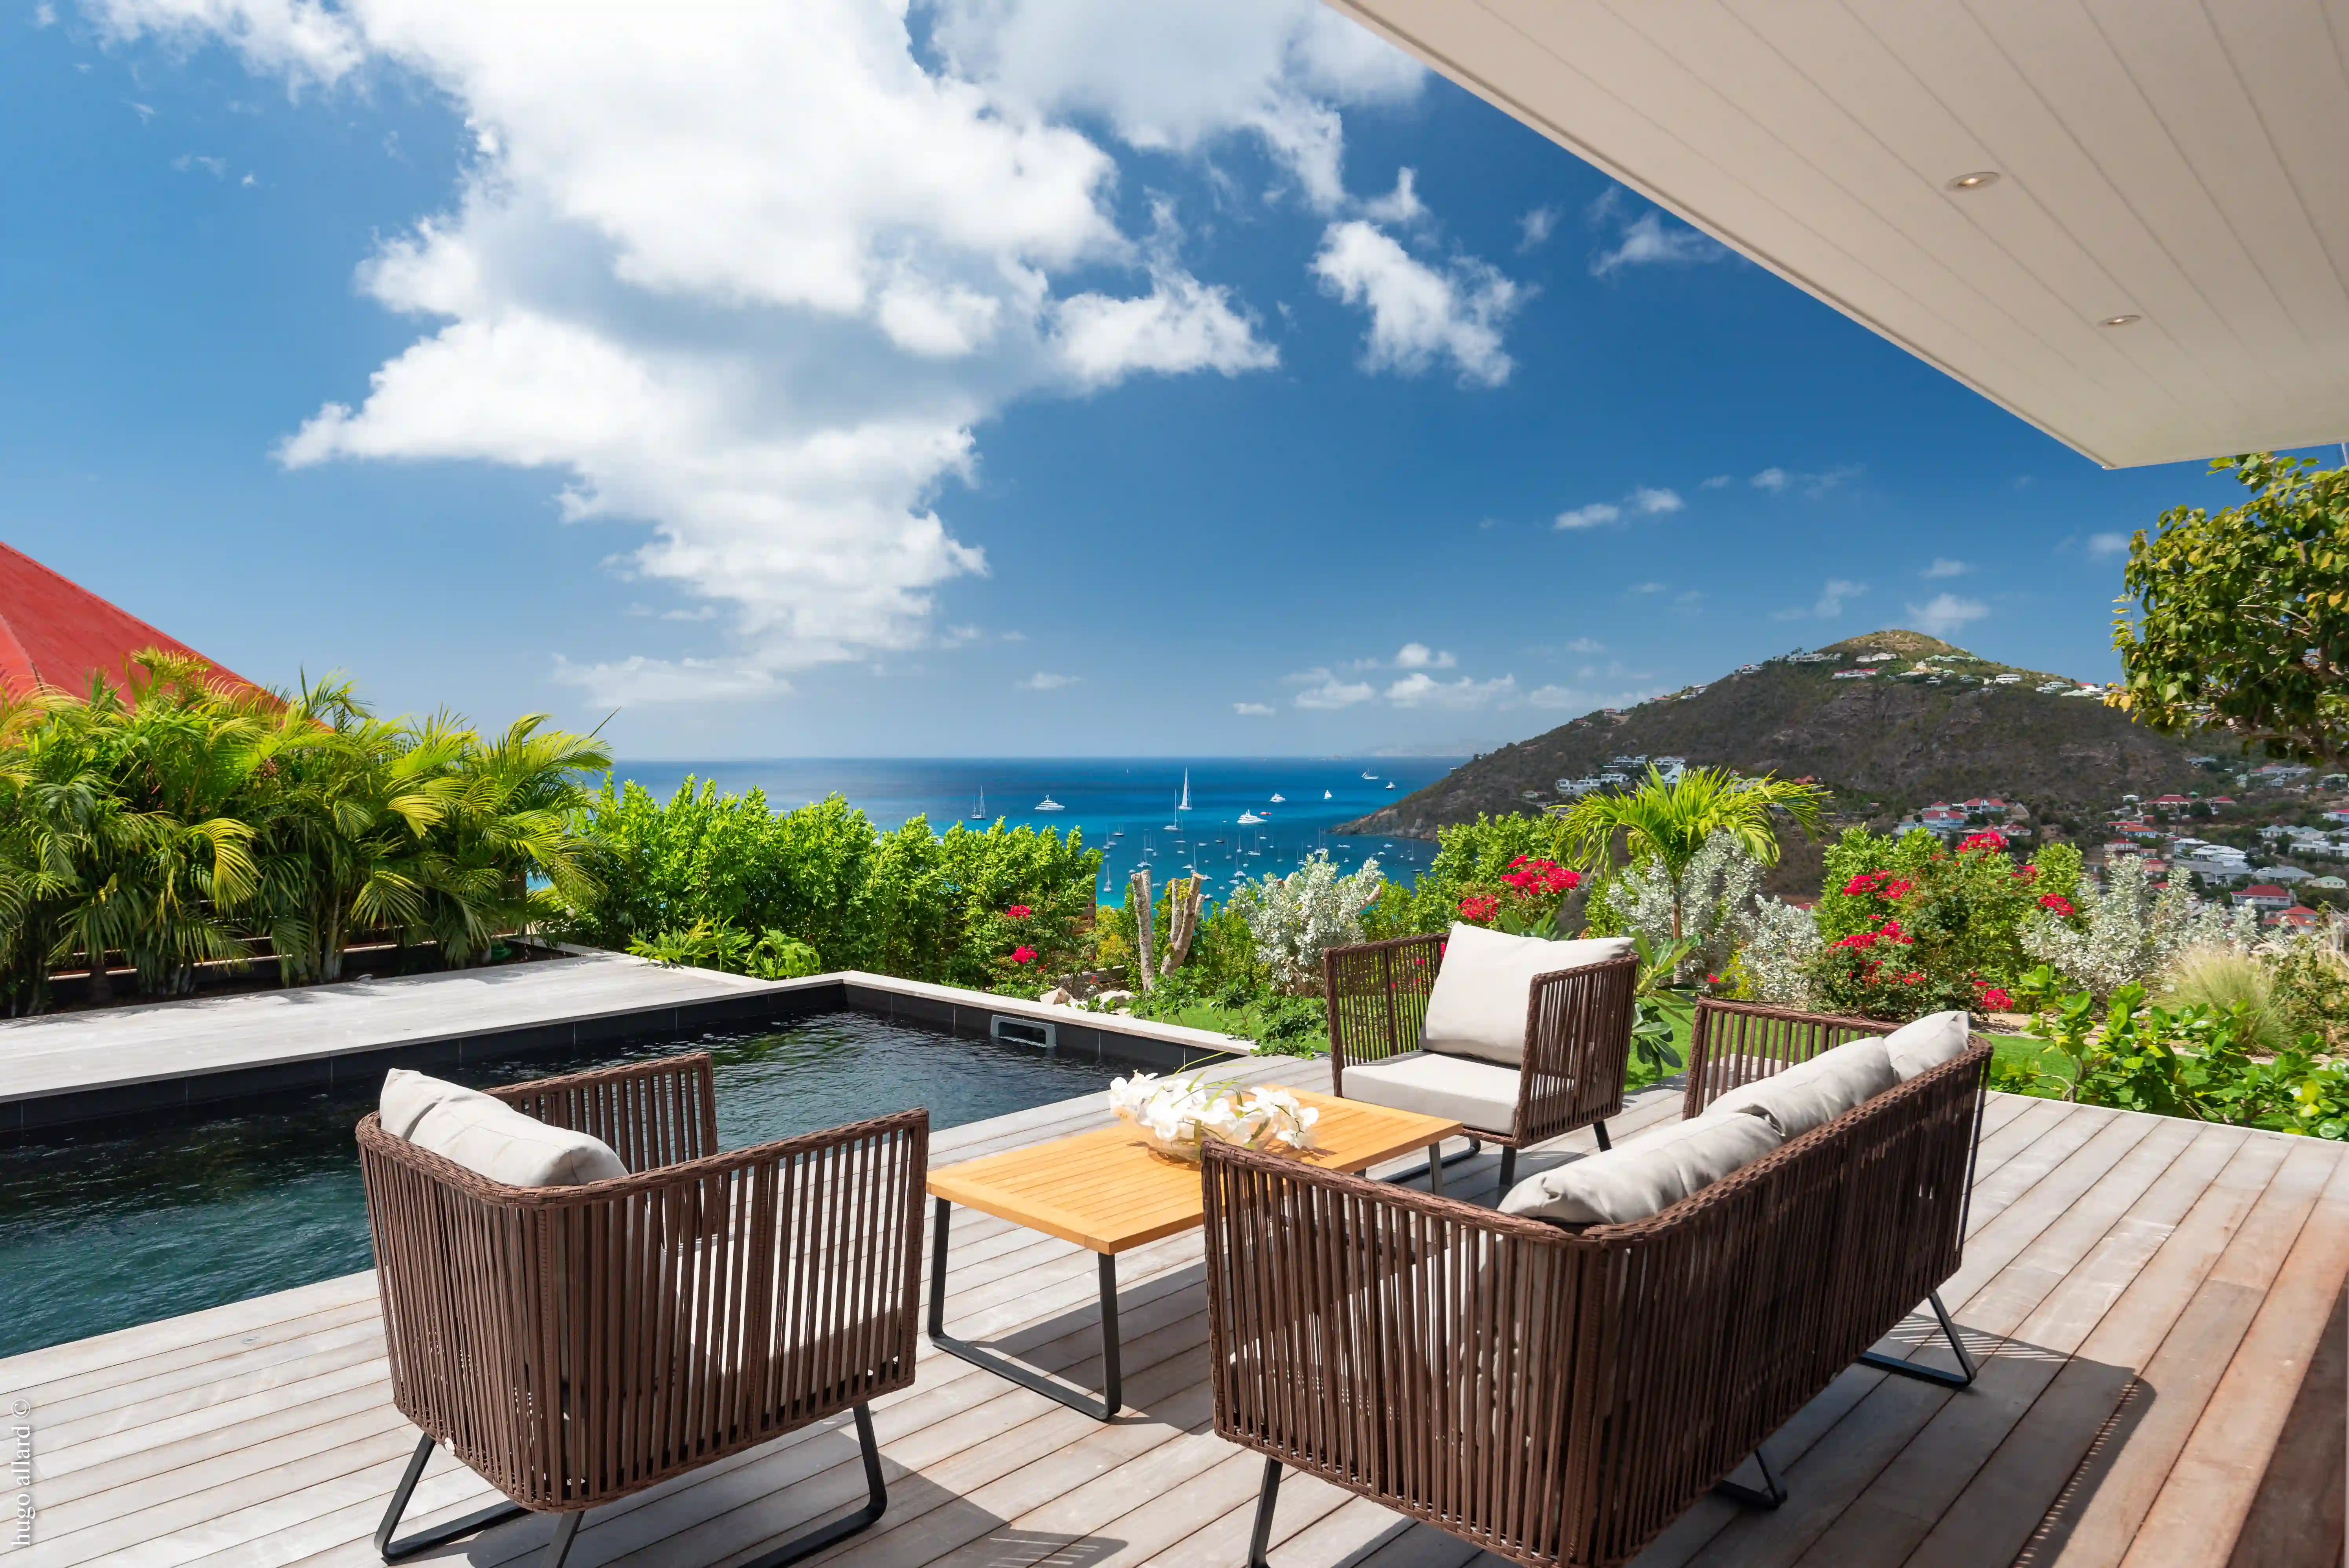 Eat in St Barts on Your New Year’s Vacation